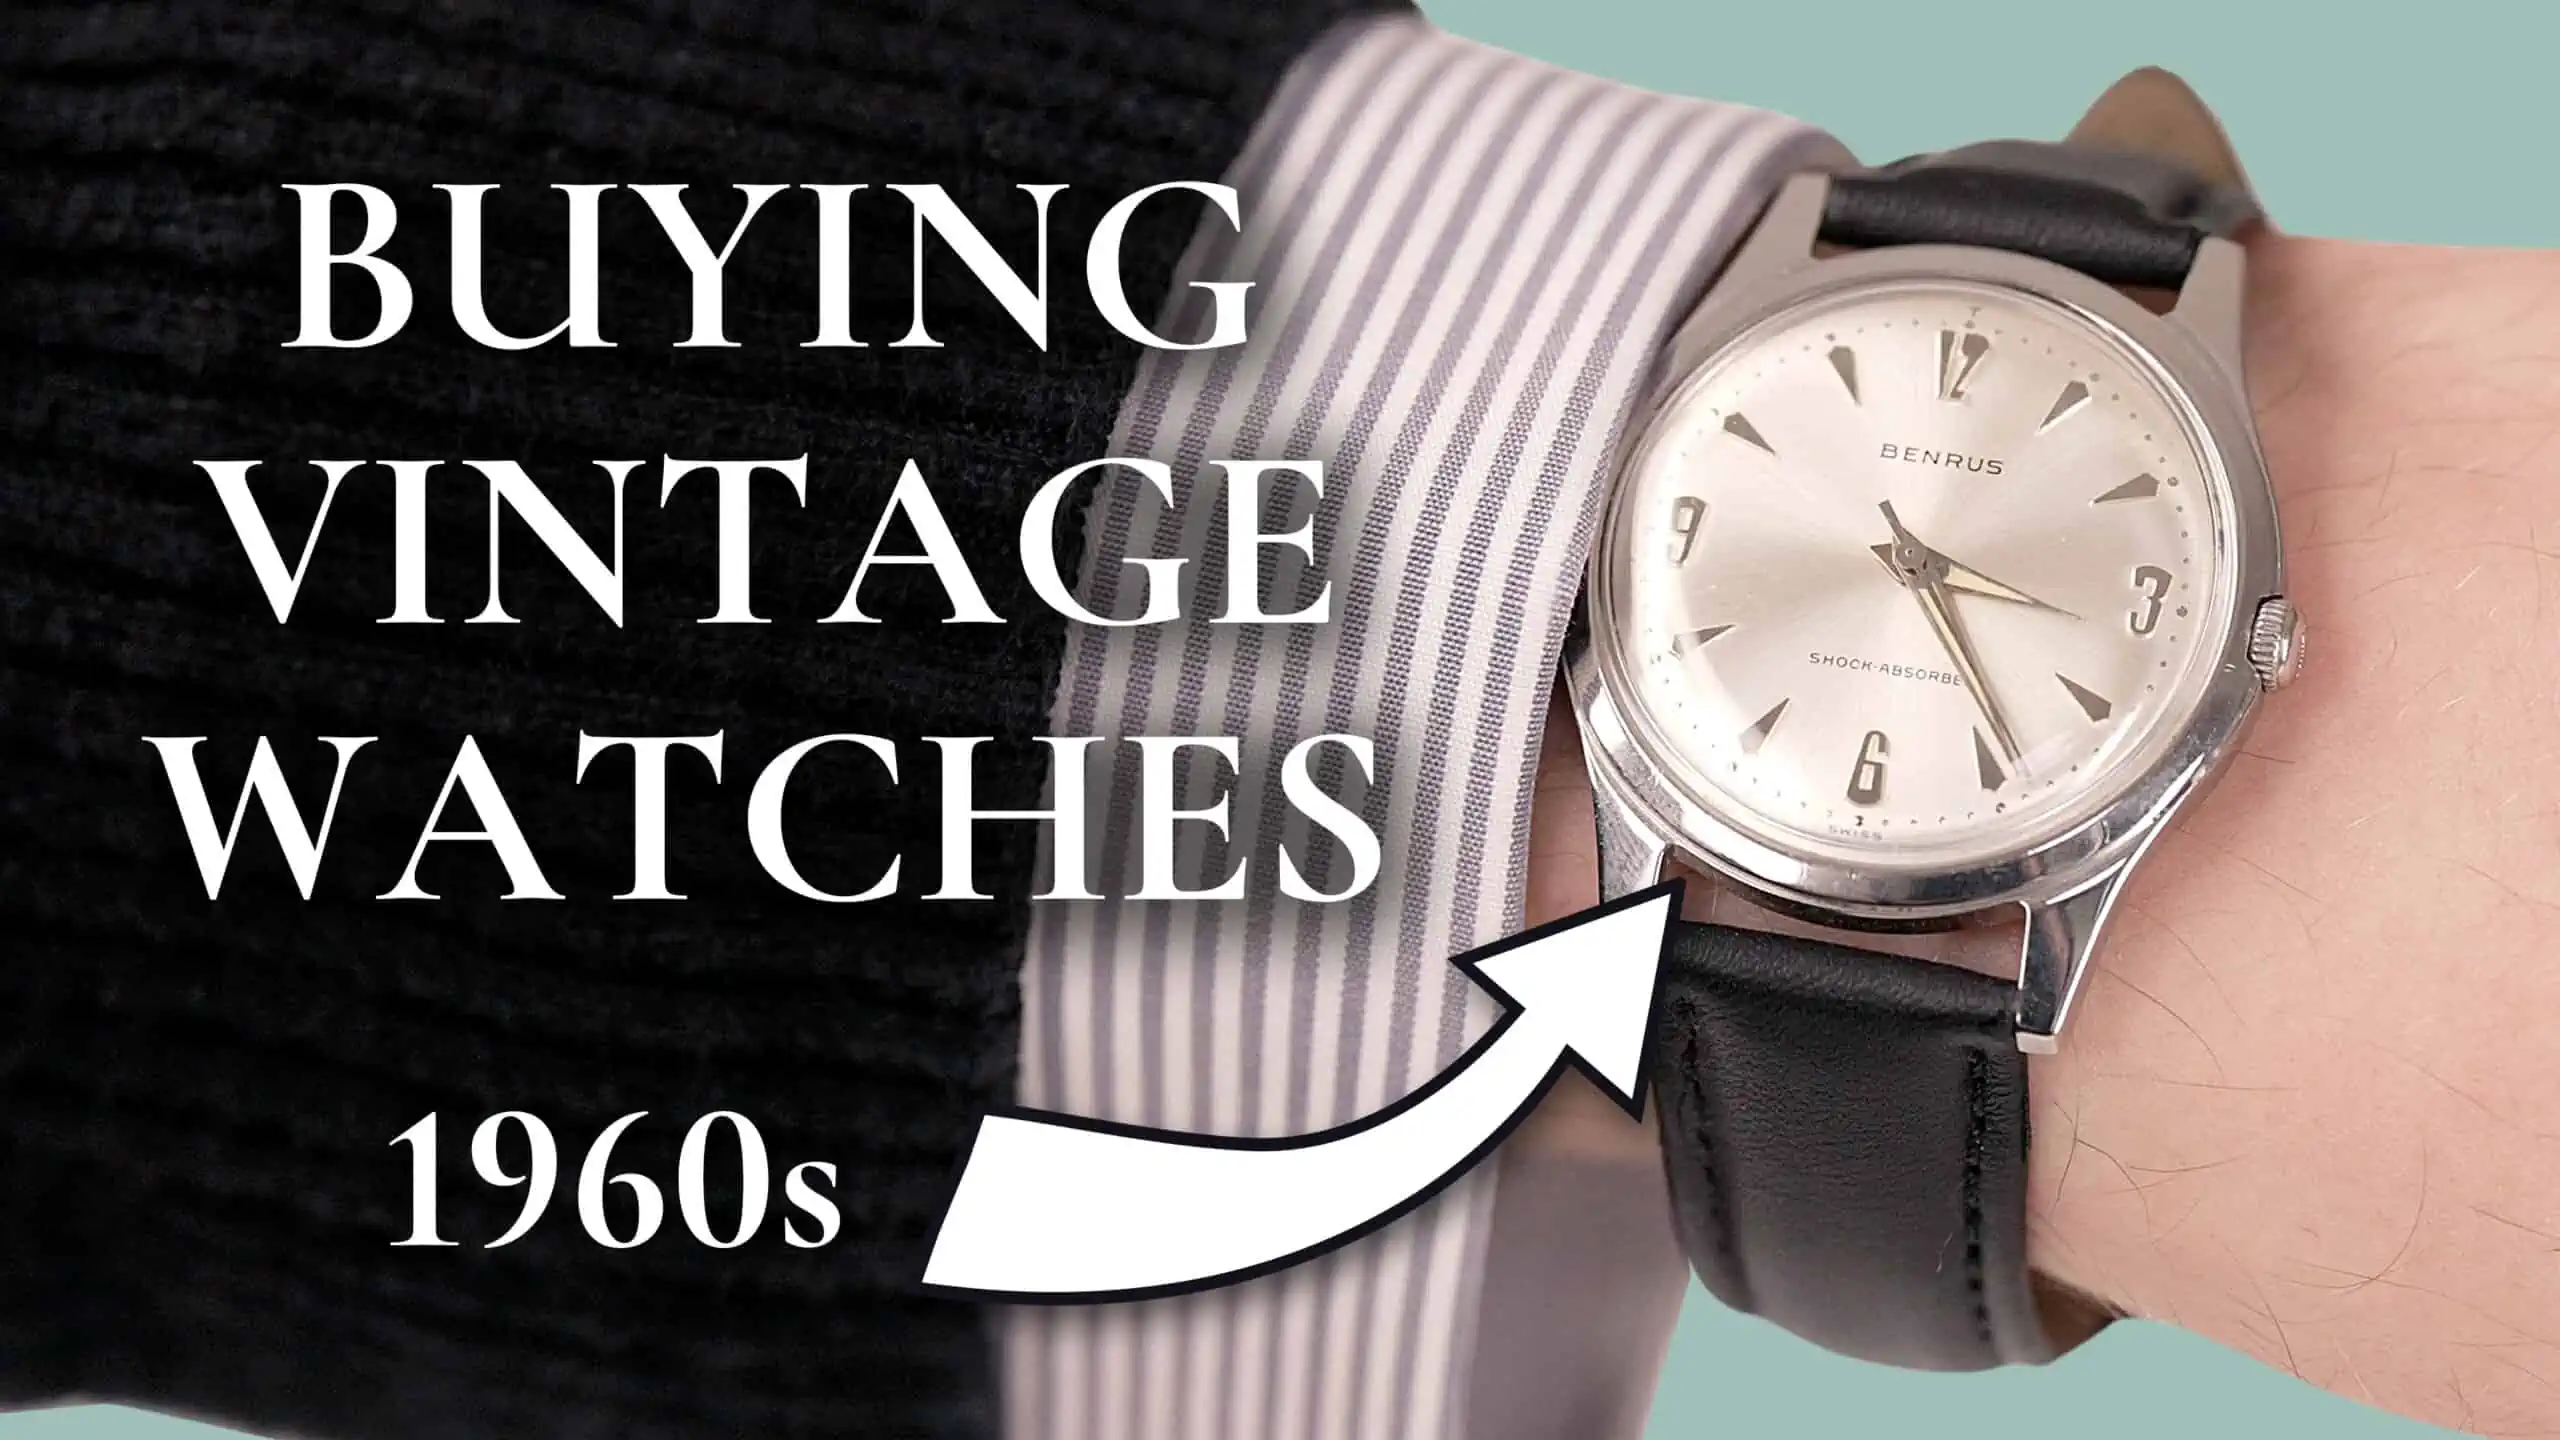 Experience more than 178 vintage watches